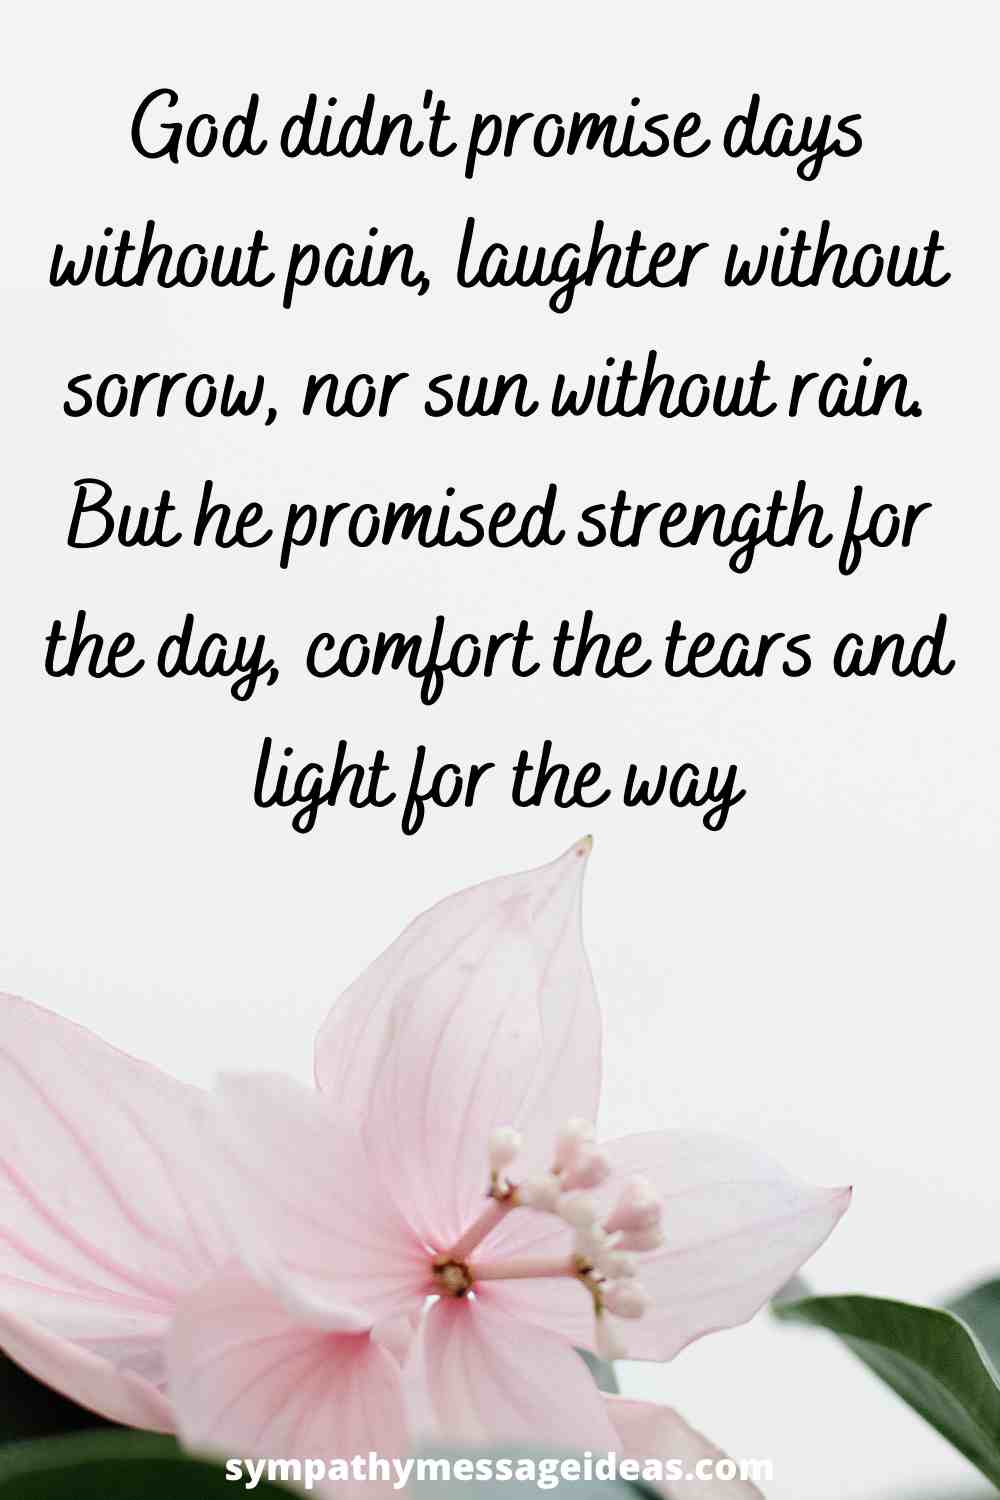 Sympathy Image with Heartfelt Quotes Card Messages